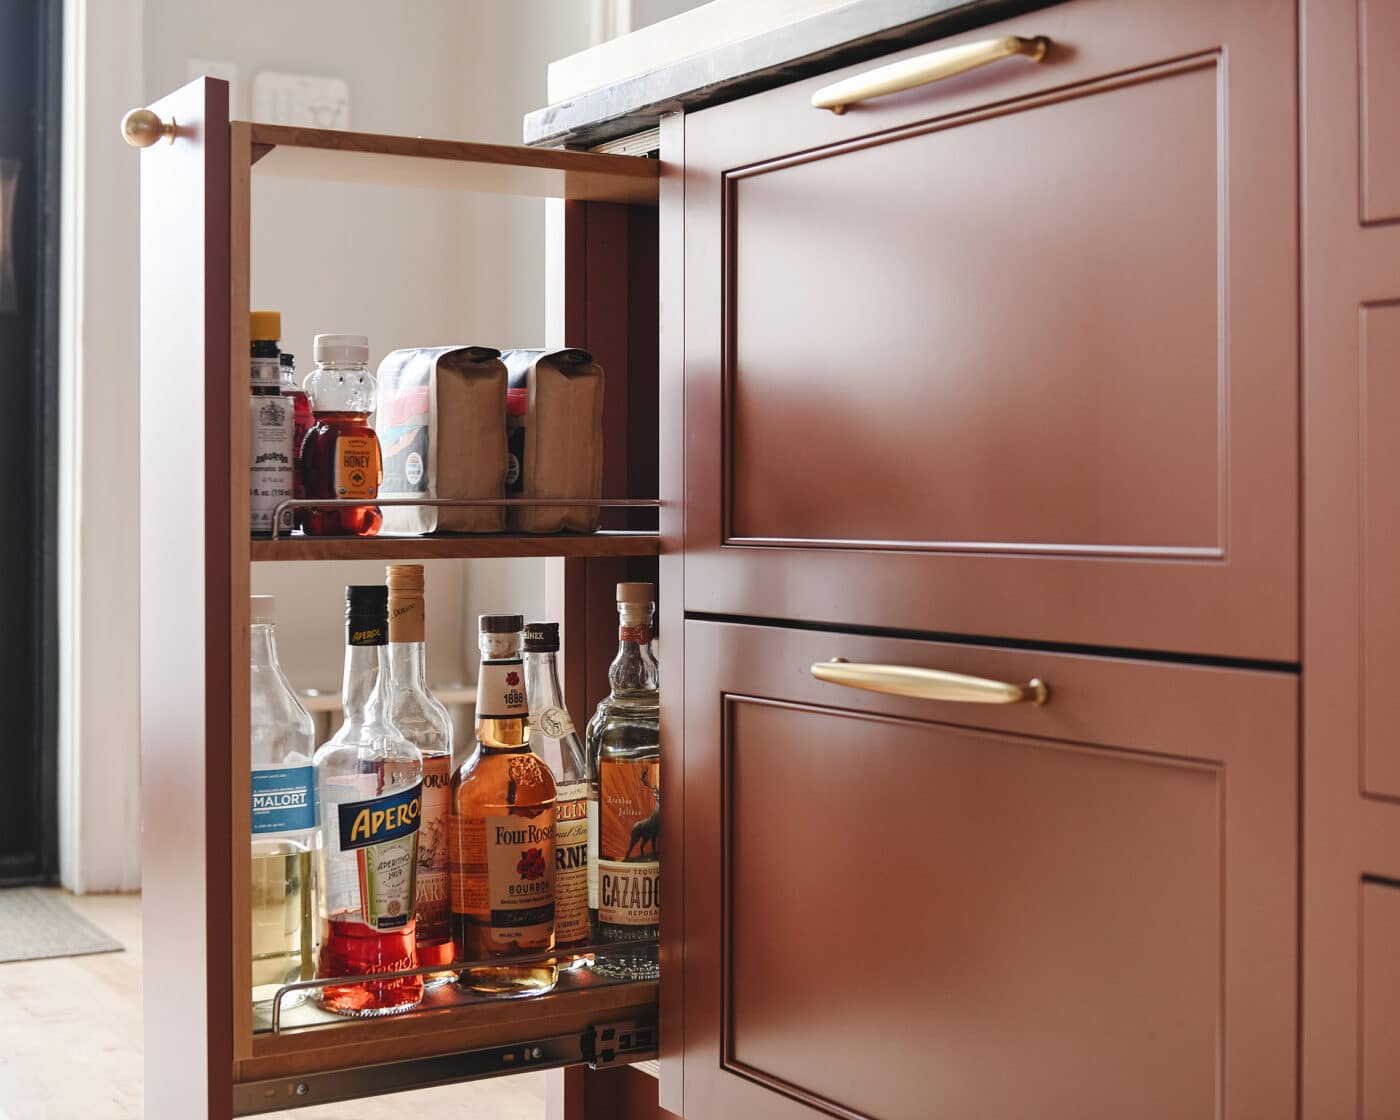 Our liquor cabinet and coffee storage in a pull out drawer, via Yellow Brick Home // kitchen organization ideas